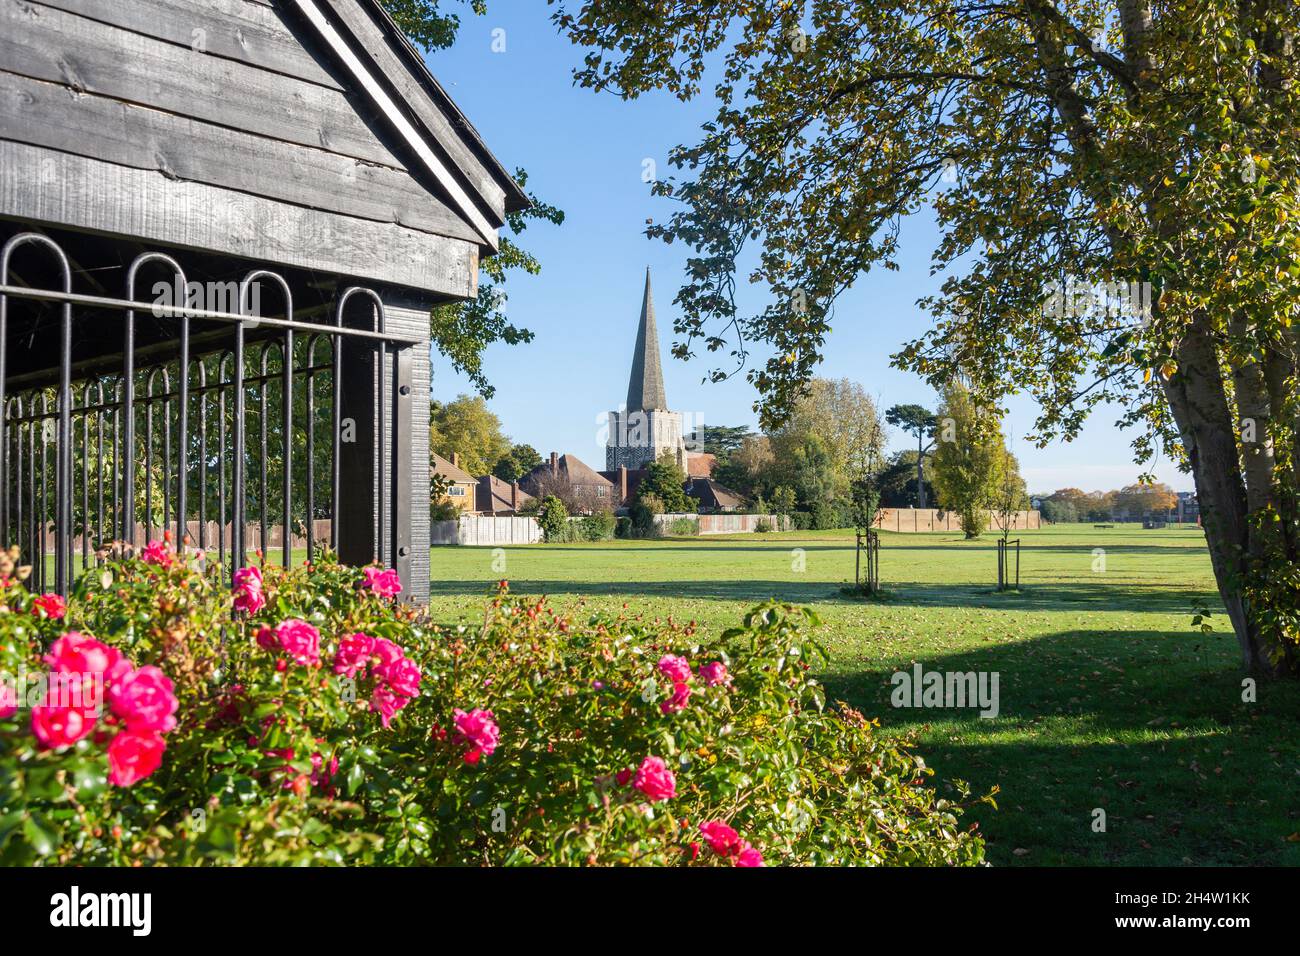 St Mary's Church and Old Village across playing field, Town Lane, Stanwell, Surrey, England, United Kingdom Stock Photo